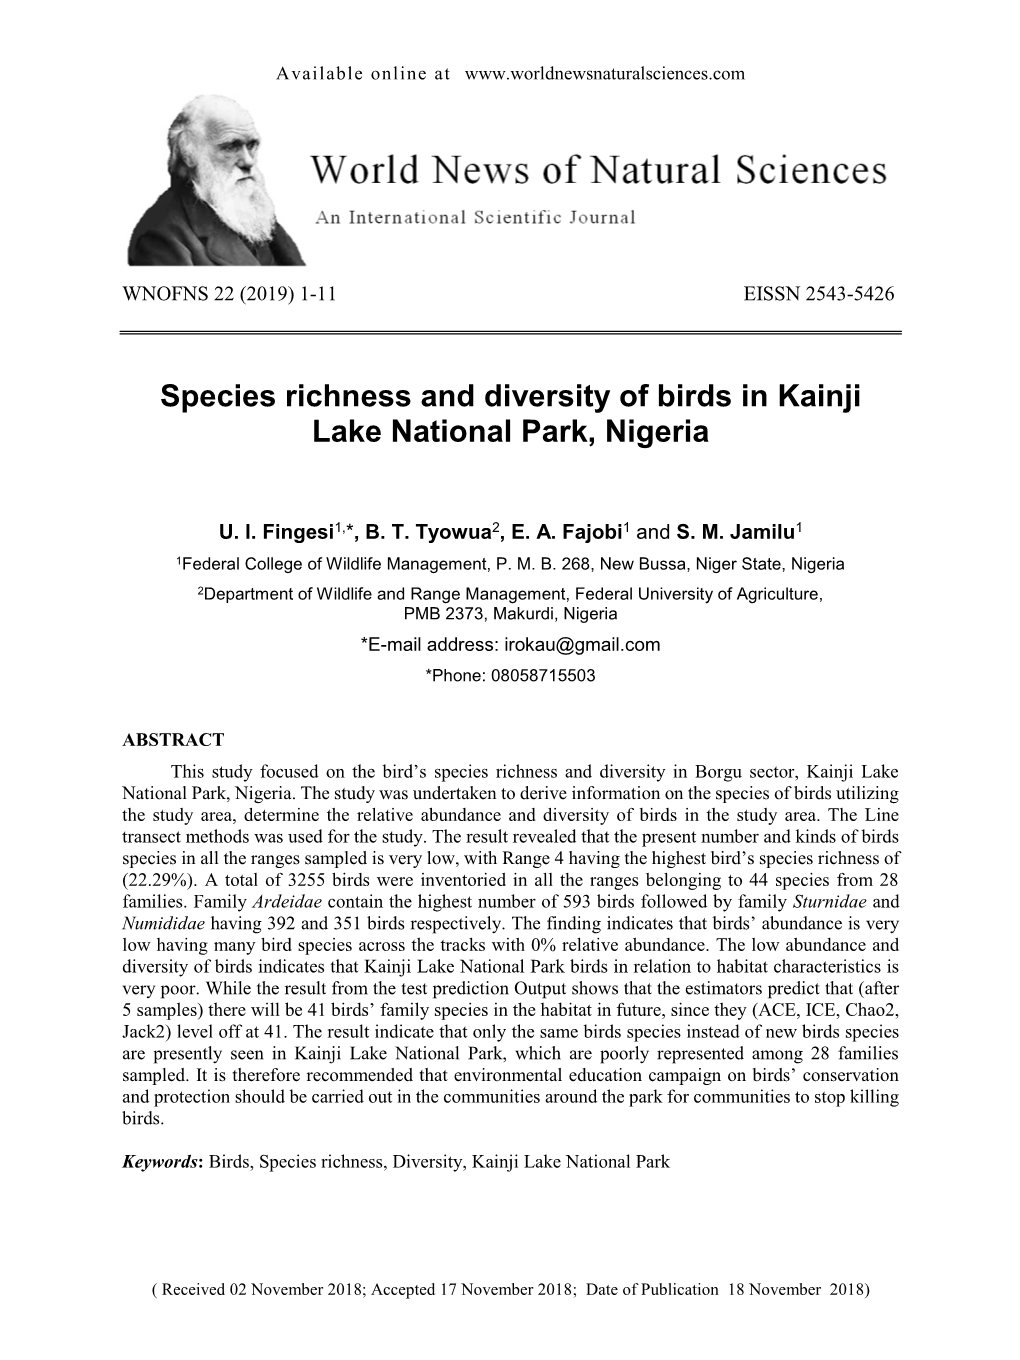 Species Richness and Diversity of Birds in Kainji Lake National Park, Nigeria